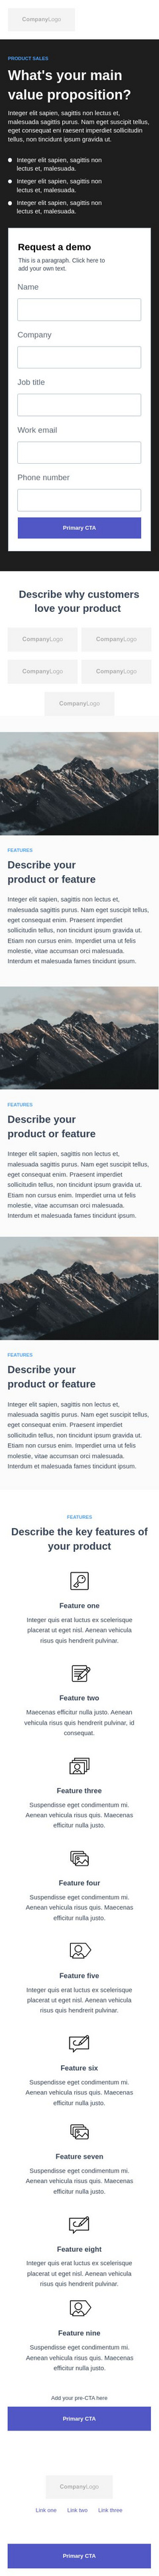 SaaS and Internet Instapage Layout 1